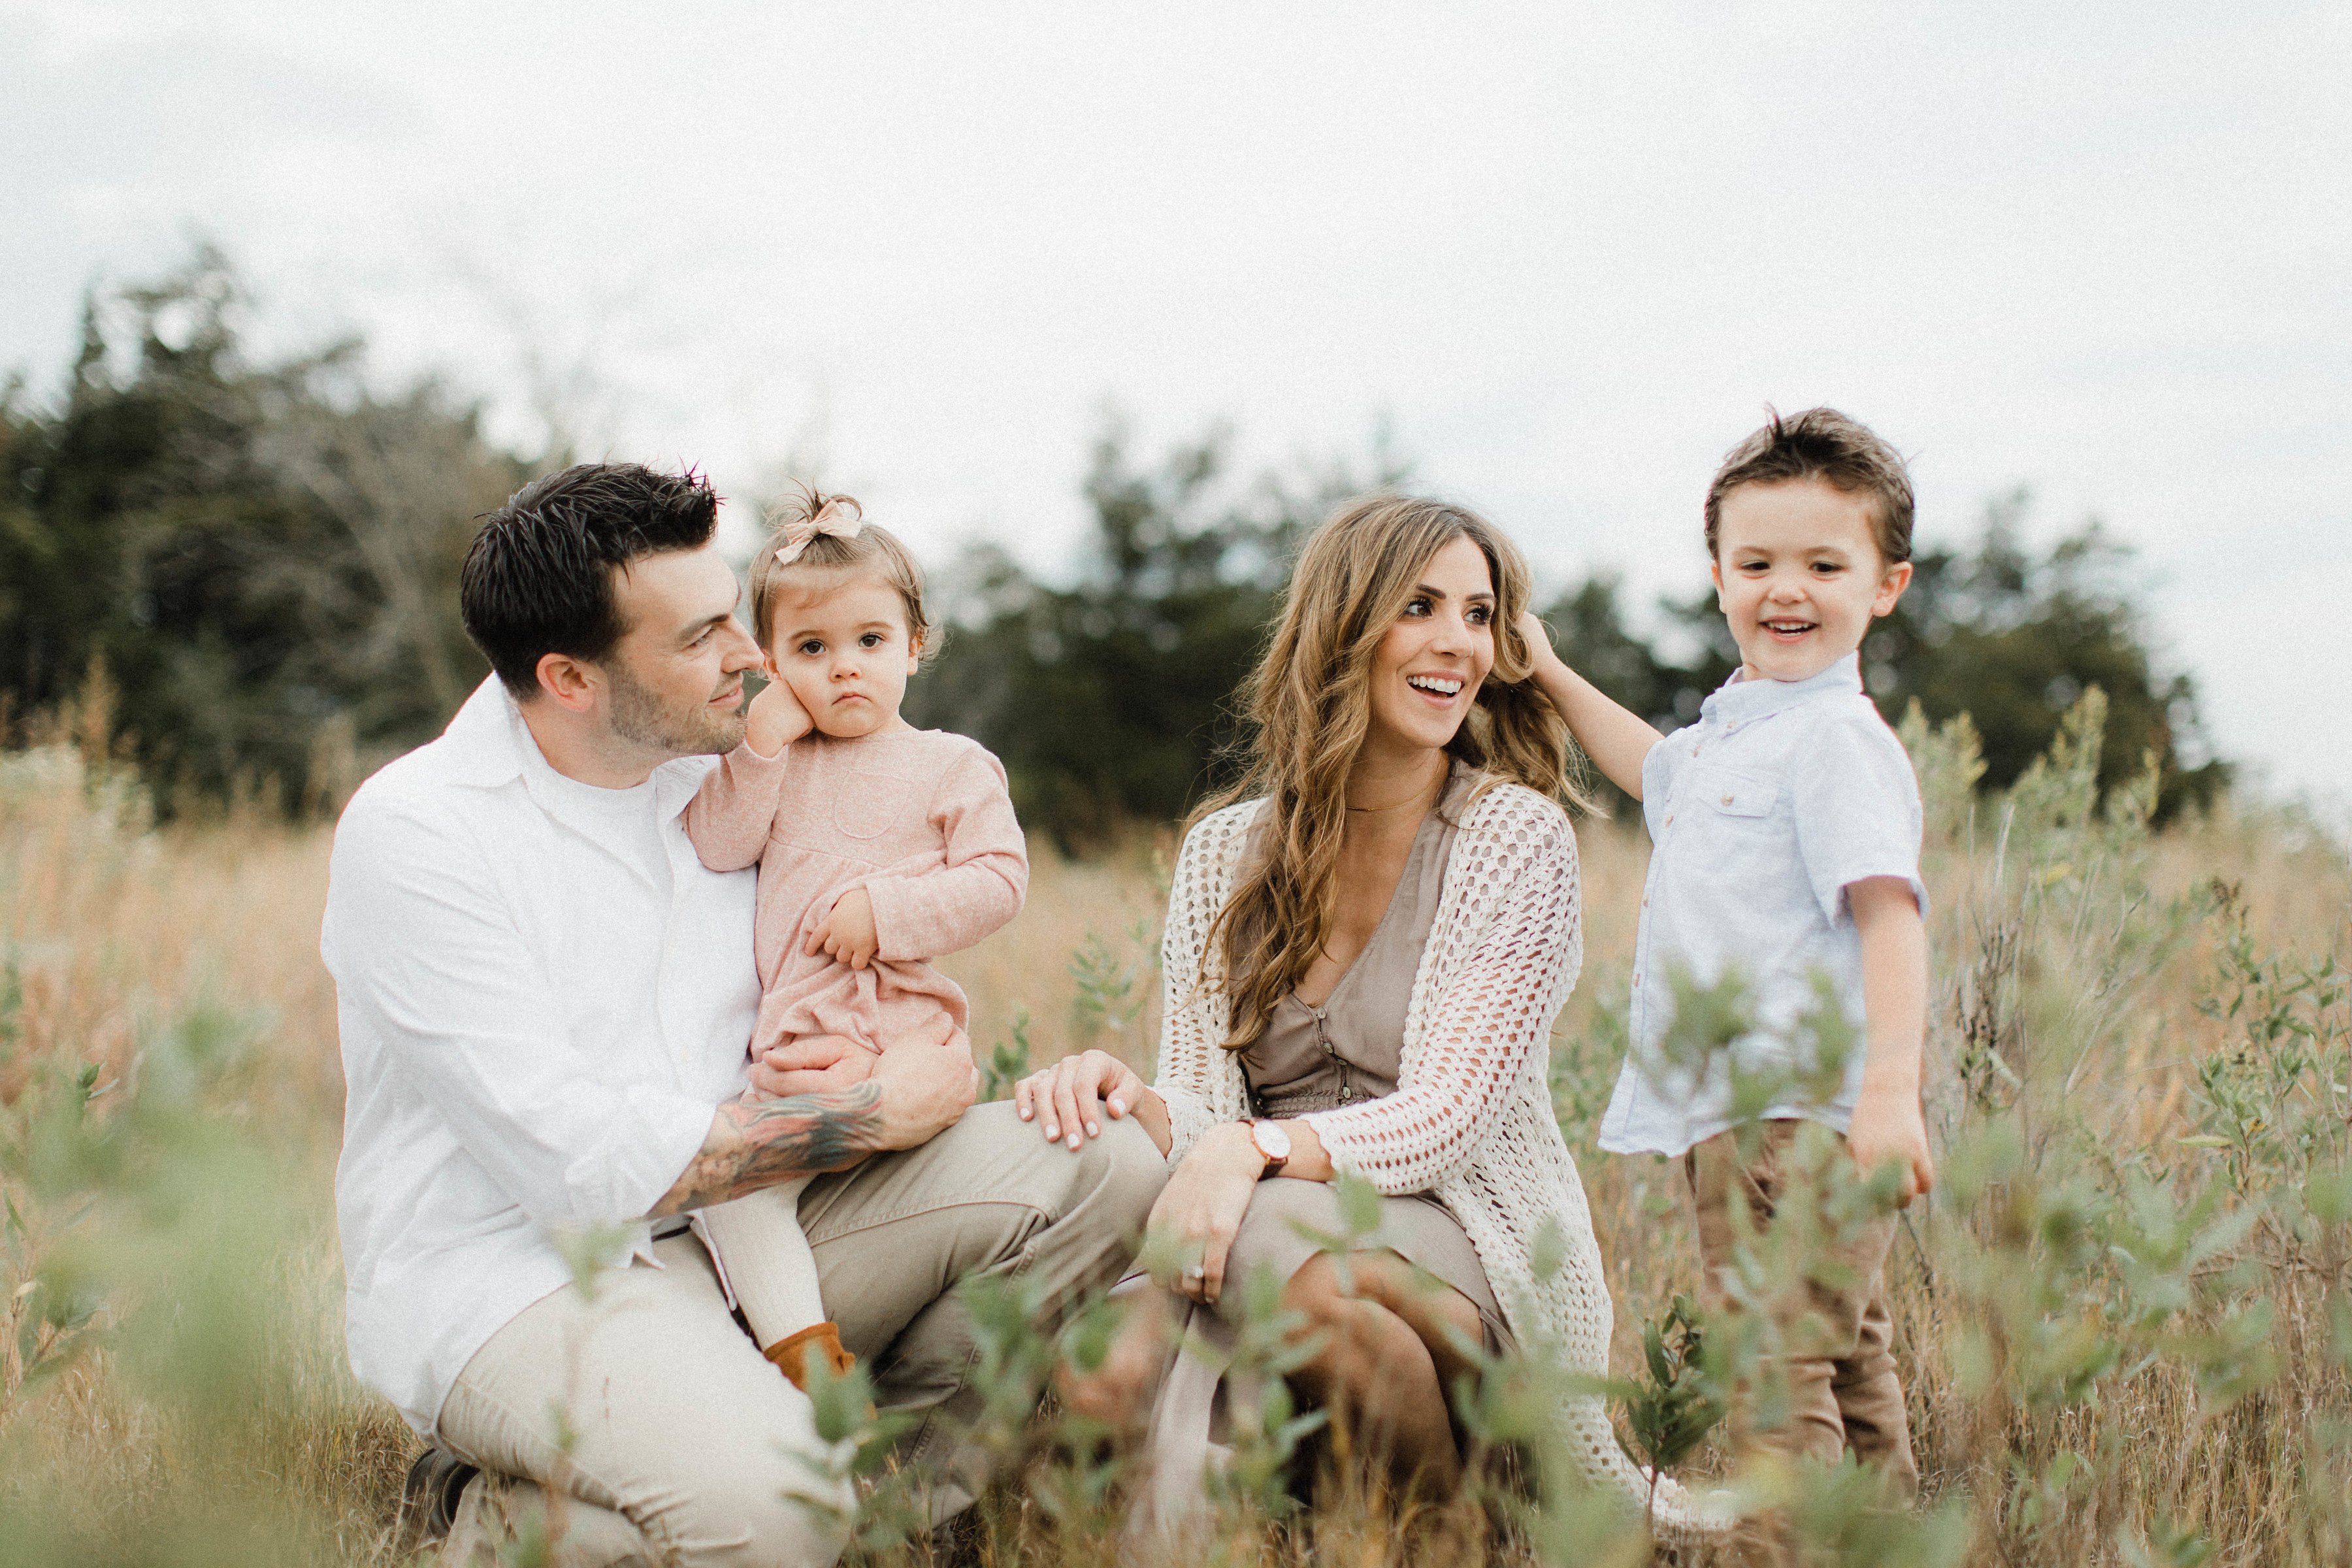 Life and style blogger Lauren McBride shares tips on What to Wear for Family Photos, including styling tips and outfit suggestions. 